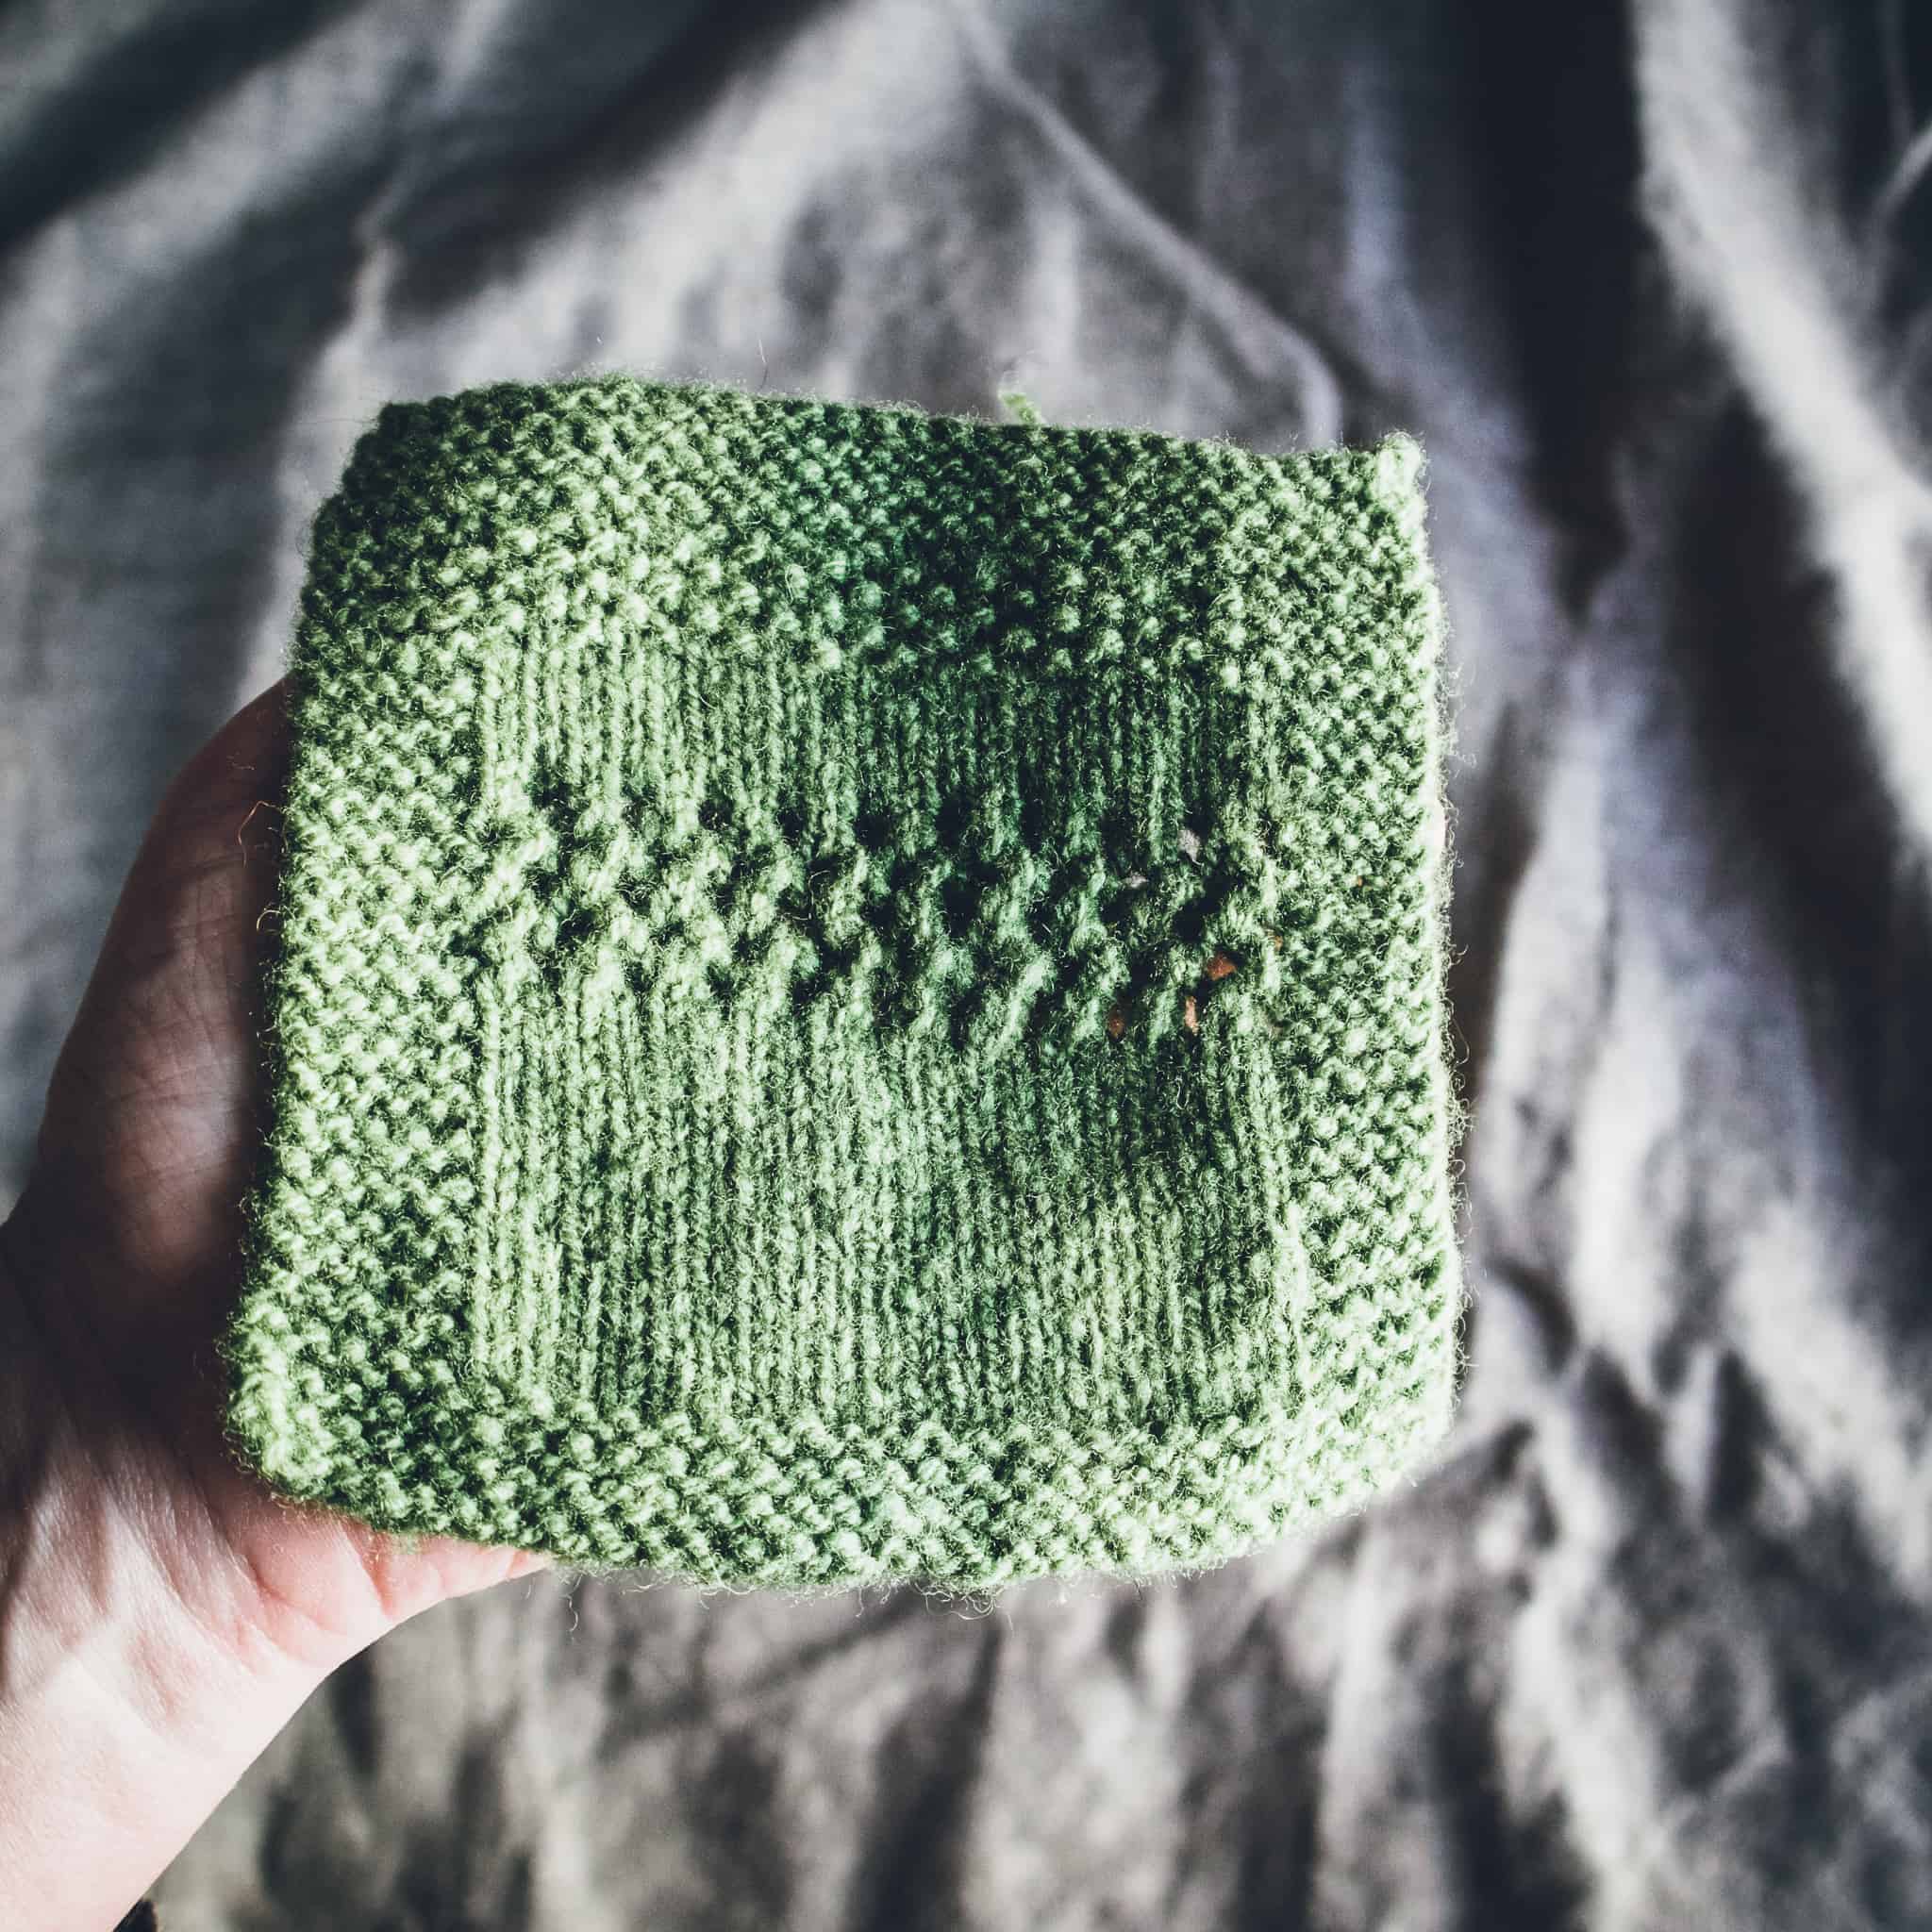 A green square of knitting.